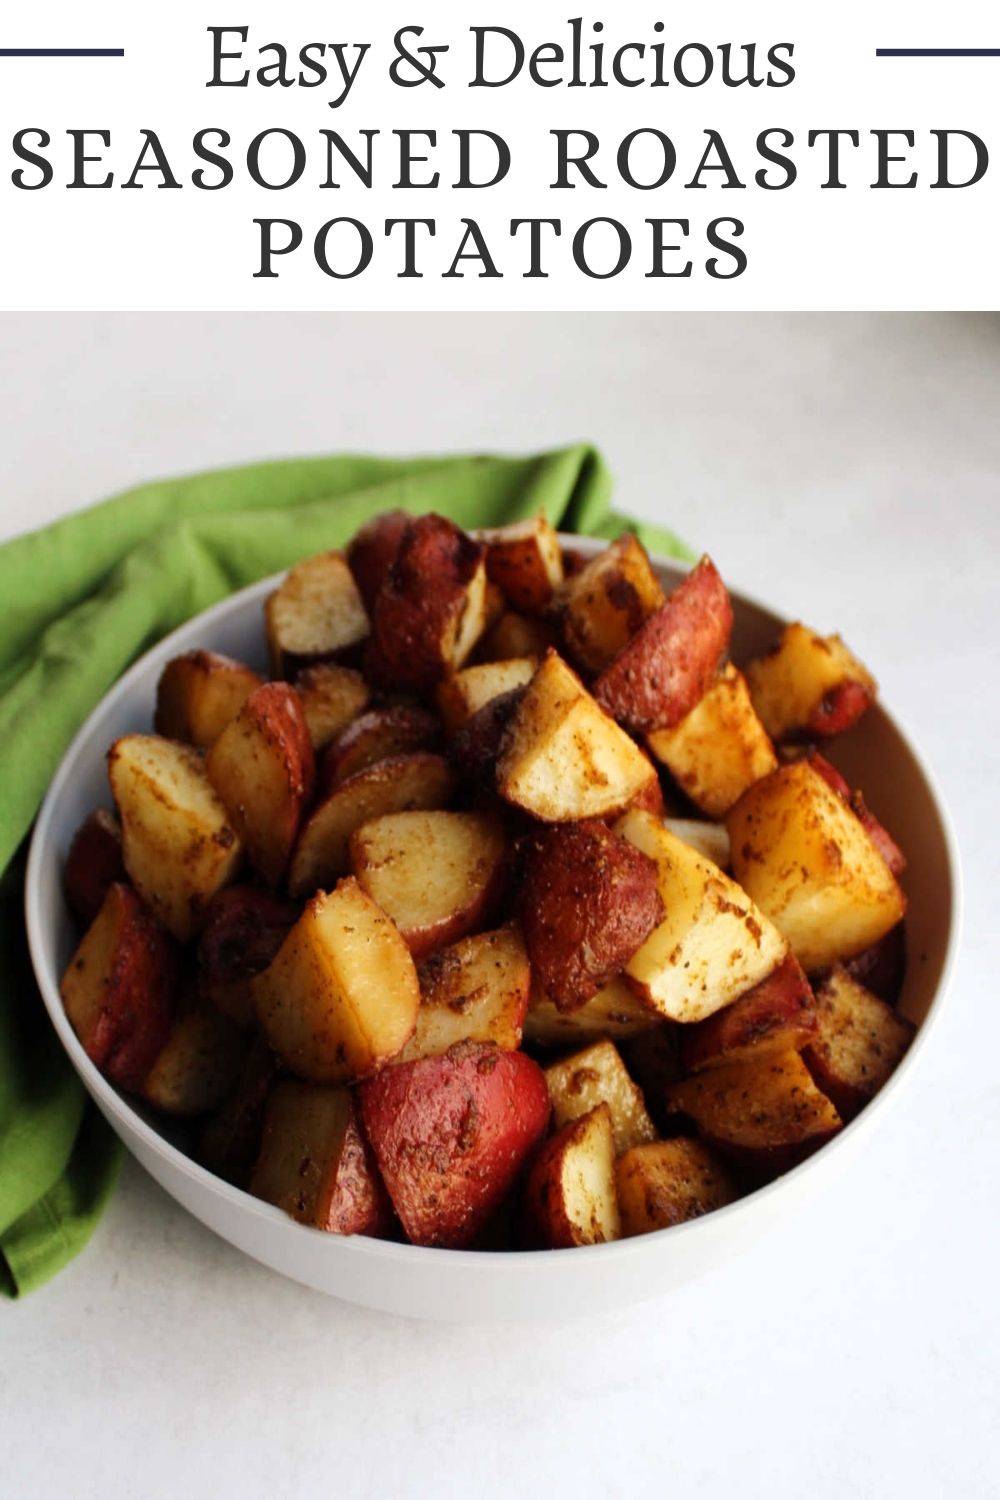 These seasoned roasted potatoes may just become your new favorite side dish. They are really simple to make and have the perfect mix of seasonings. Each bit of potato has a slightly crisp exterior with a soft interior for a combination that is hard to beat.